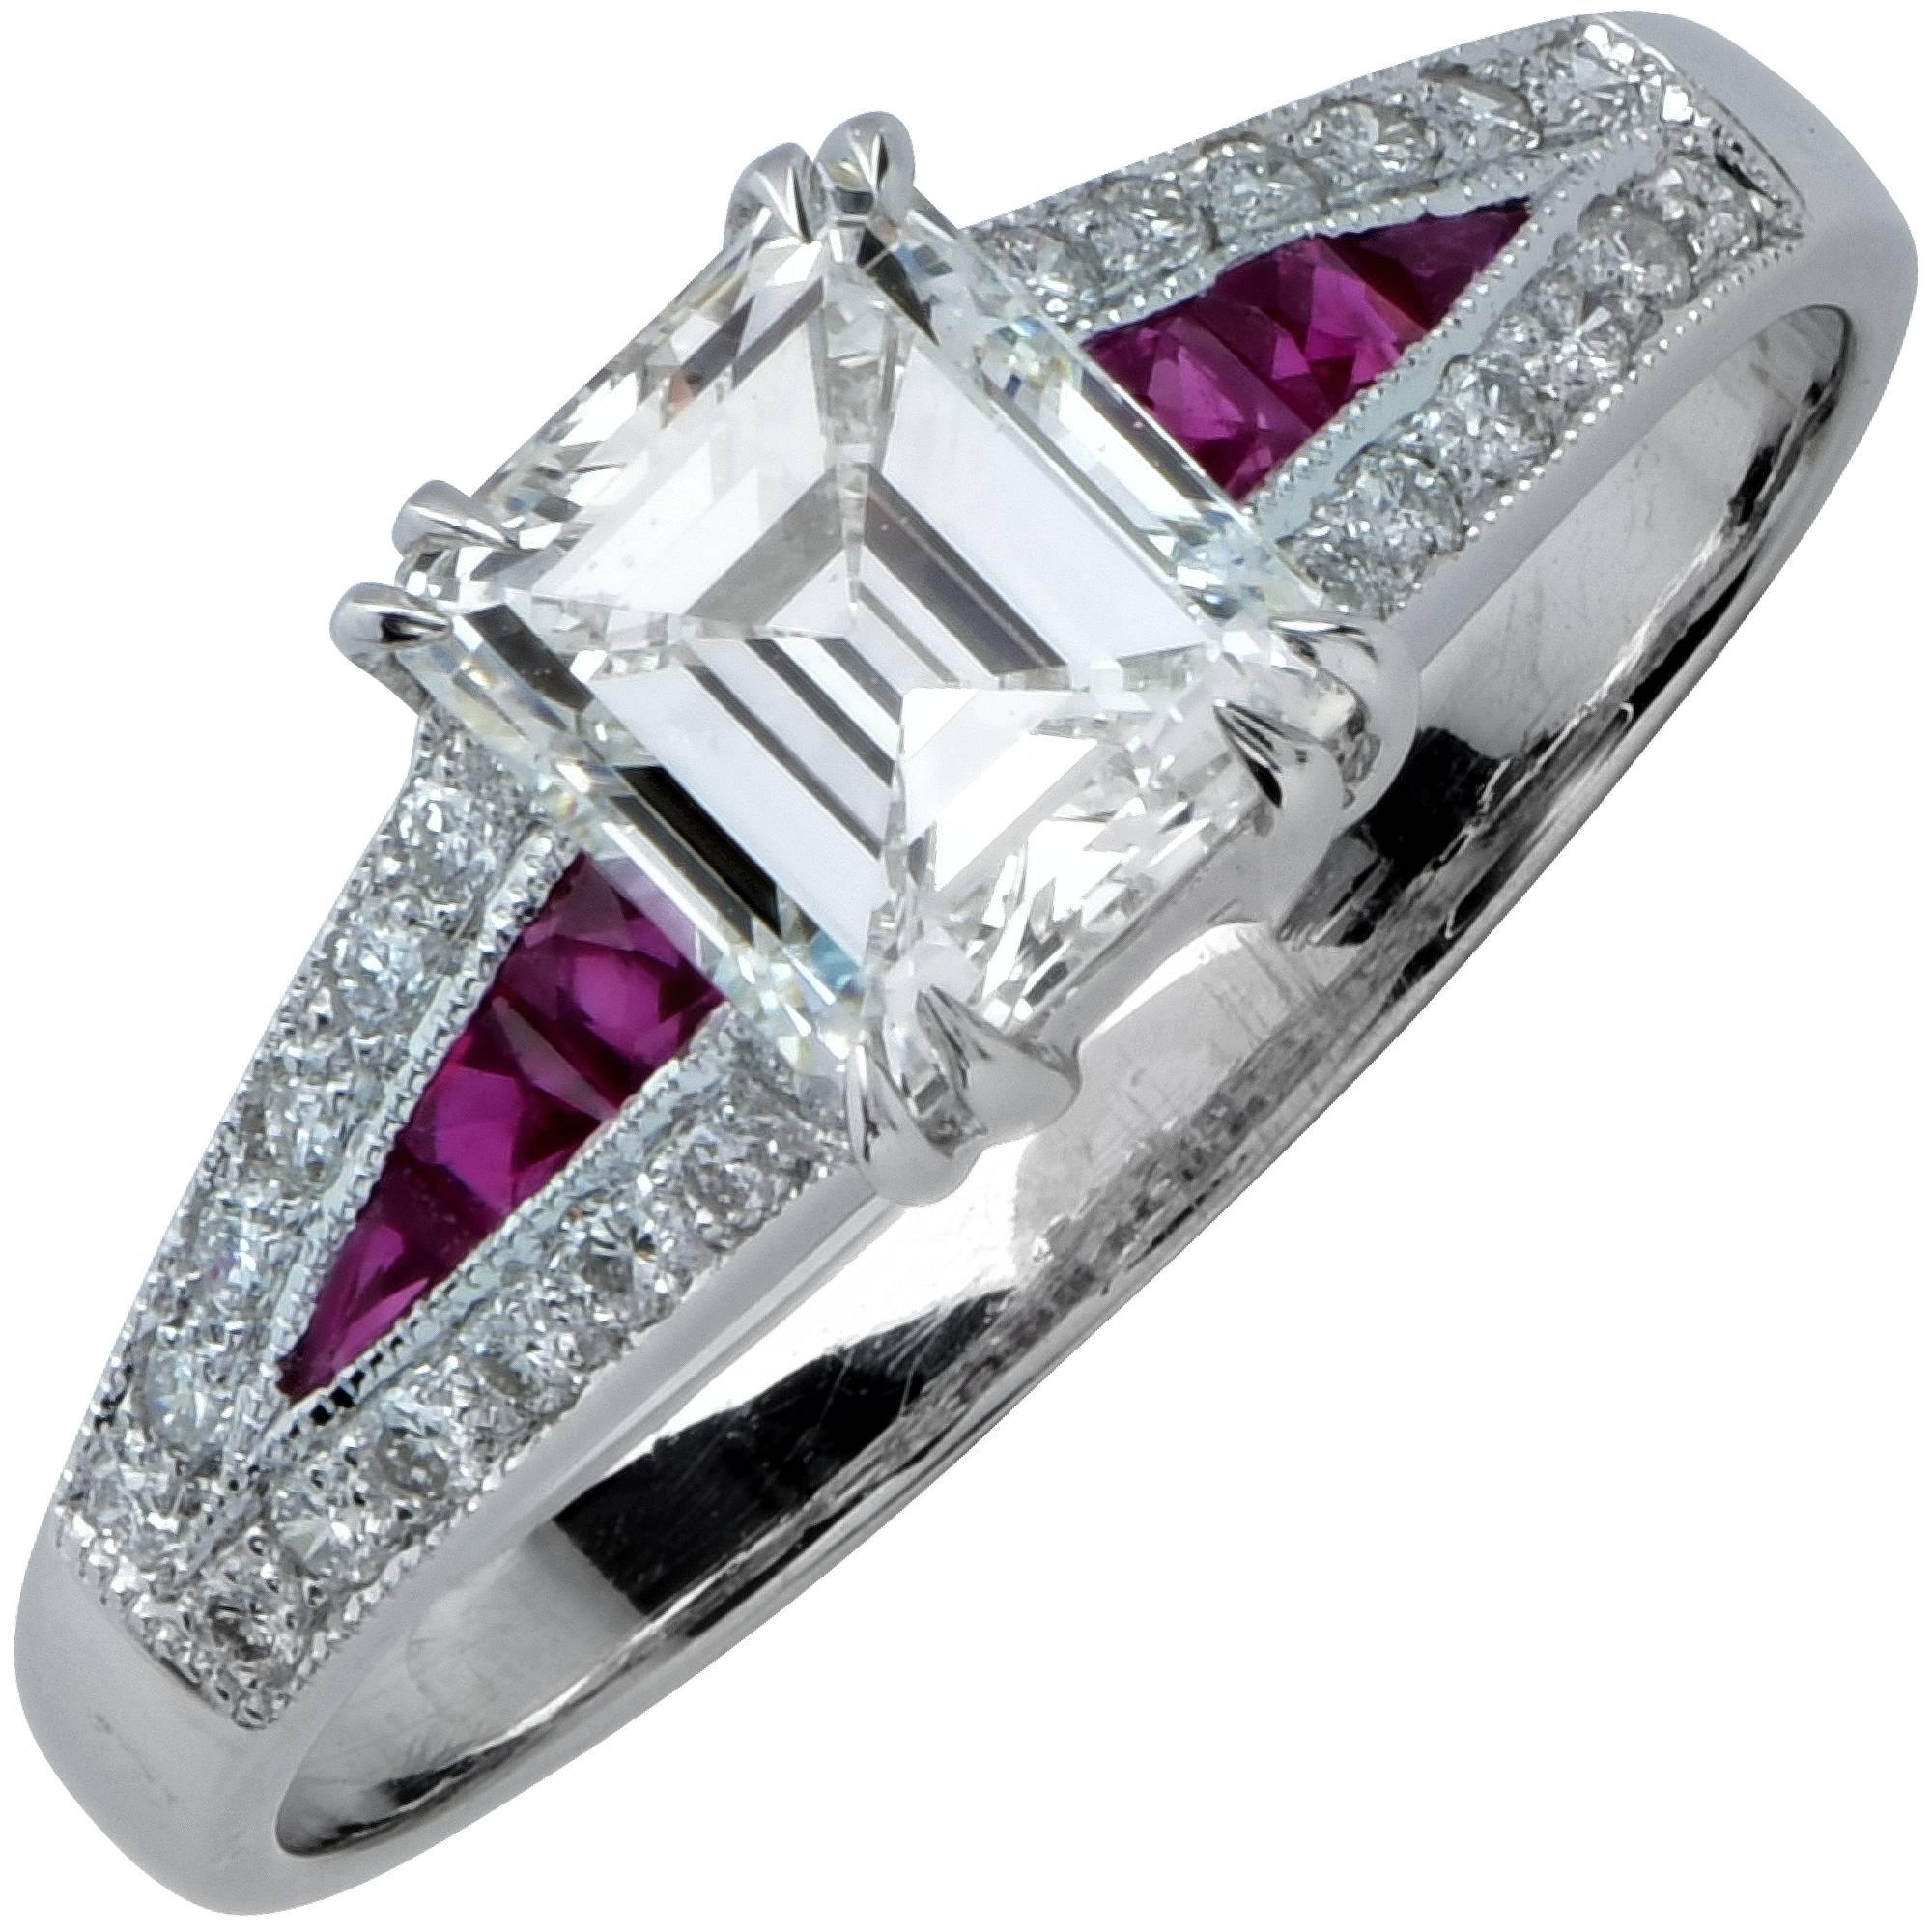 GIA Graded 1.03 Carat Emerald Cut Diamond and Ruby Engagement Ring